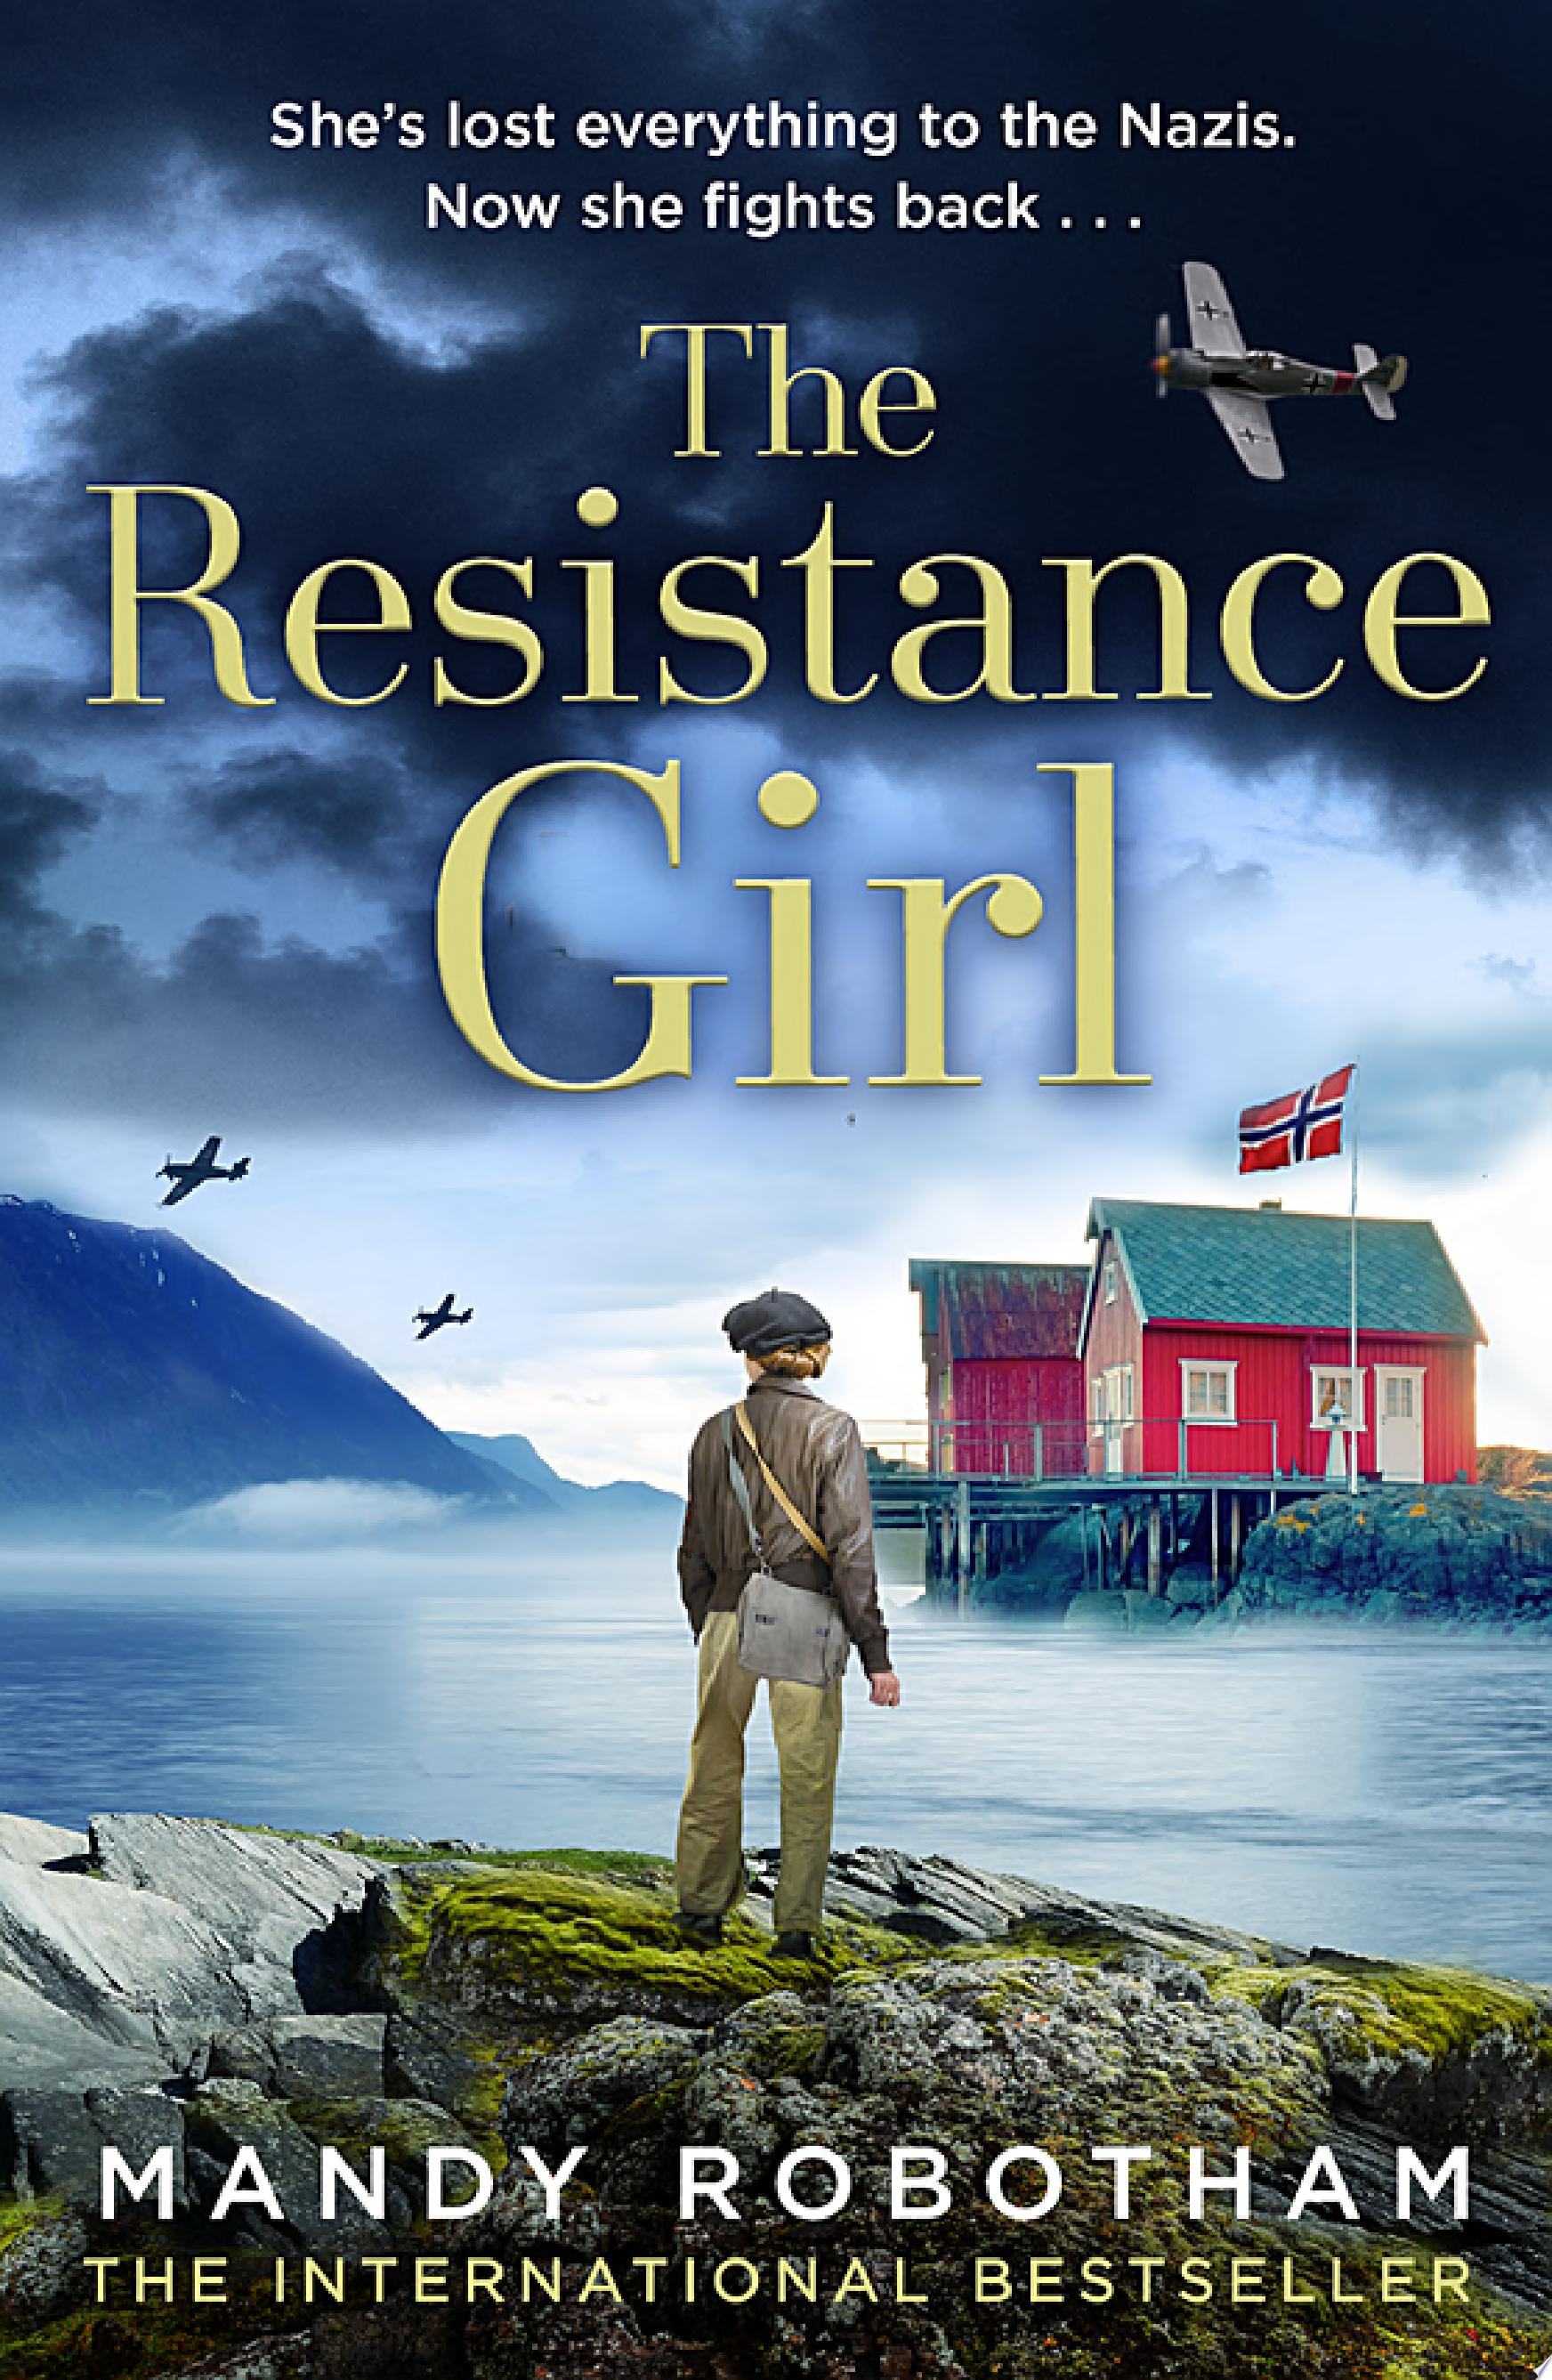 Image for "The Resistance Girl"